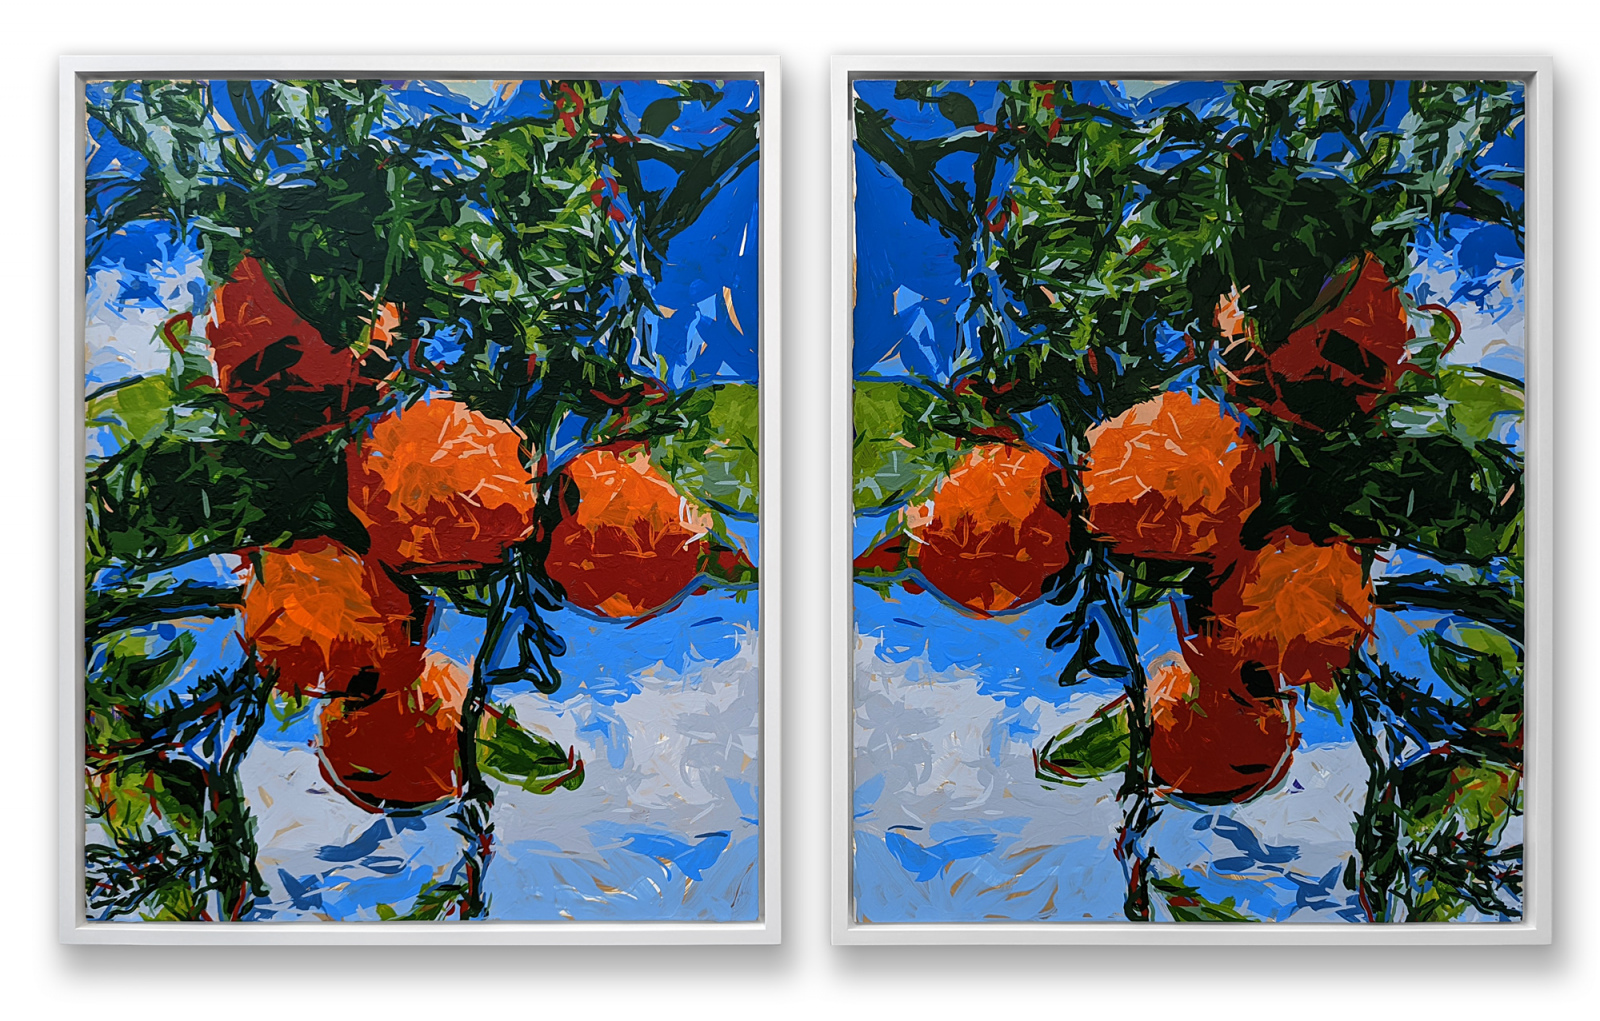 Rob and Nick Carter - RN1460, Orange Tree, Saint-Paul de Vence Robot Painting Diptych - Painting time: 27:46:00 - Stroke count: 10,274, 15-20 July 2022 · © Copyright 2023